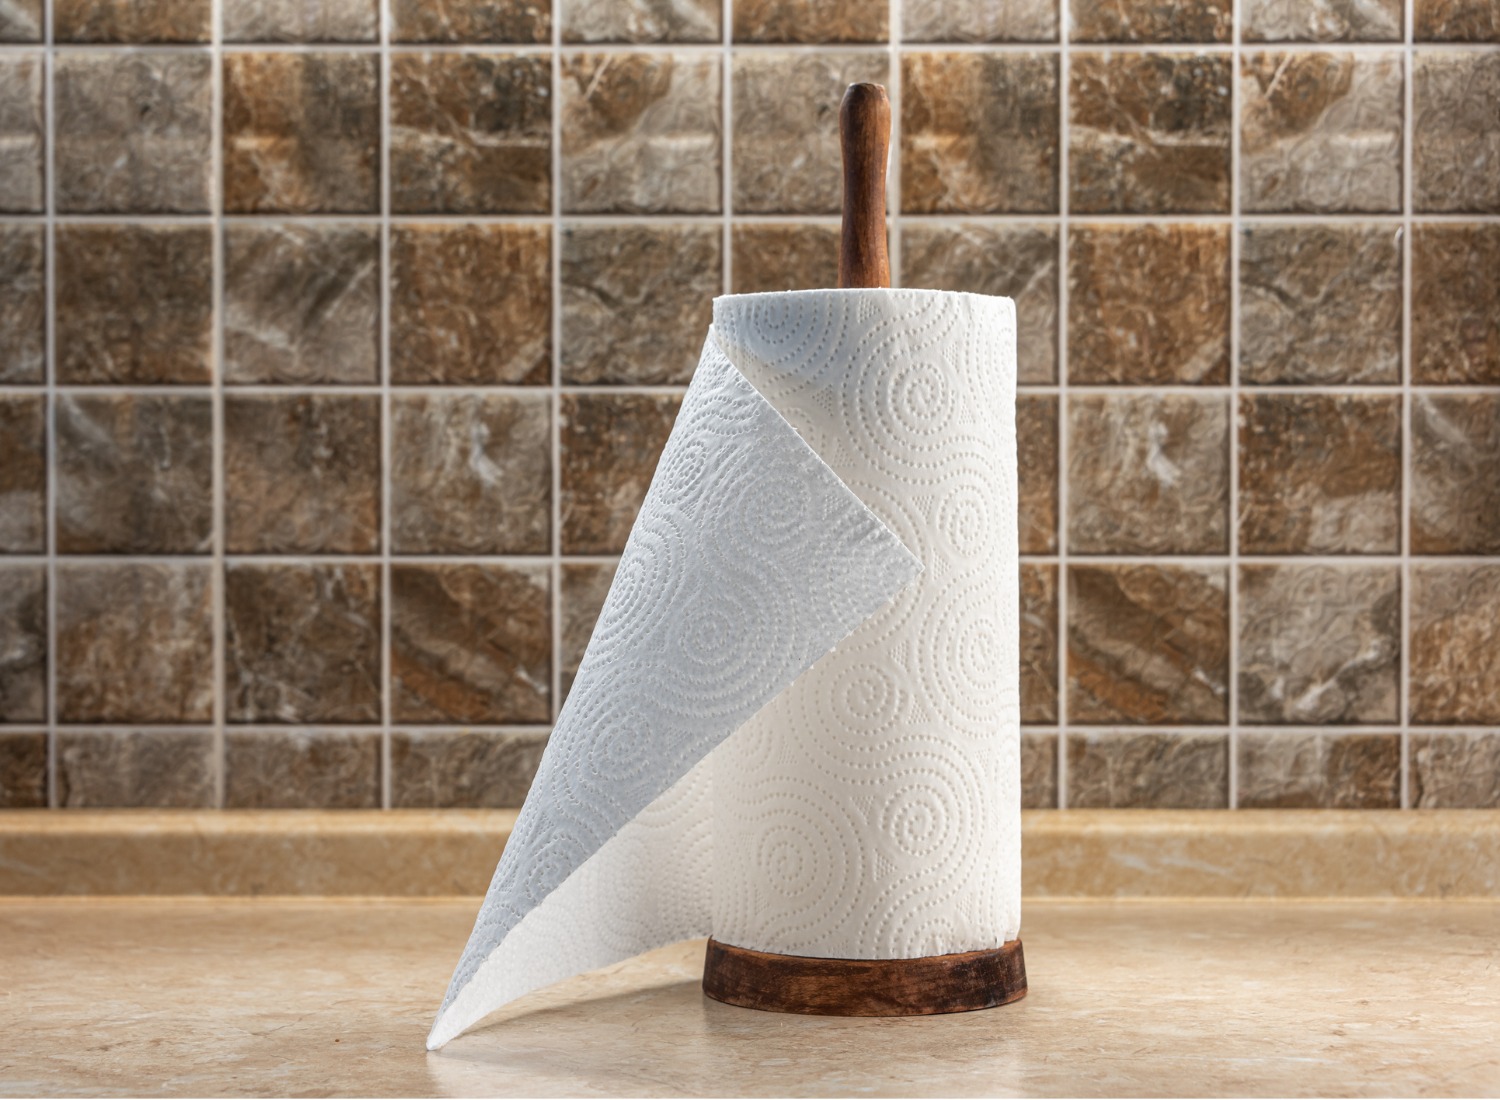 10 Best Selling Countertop Paper Towel Holders for 2023 - The Jerusalem Post